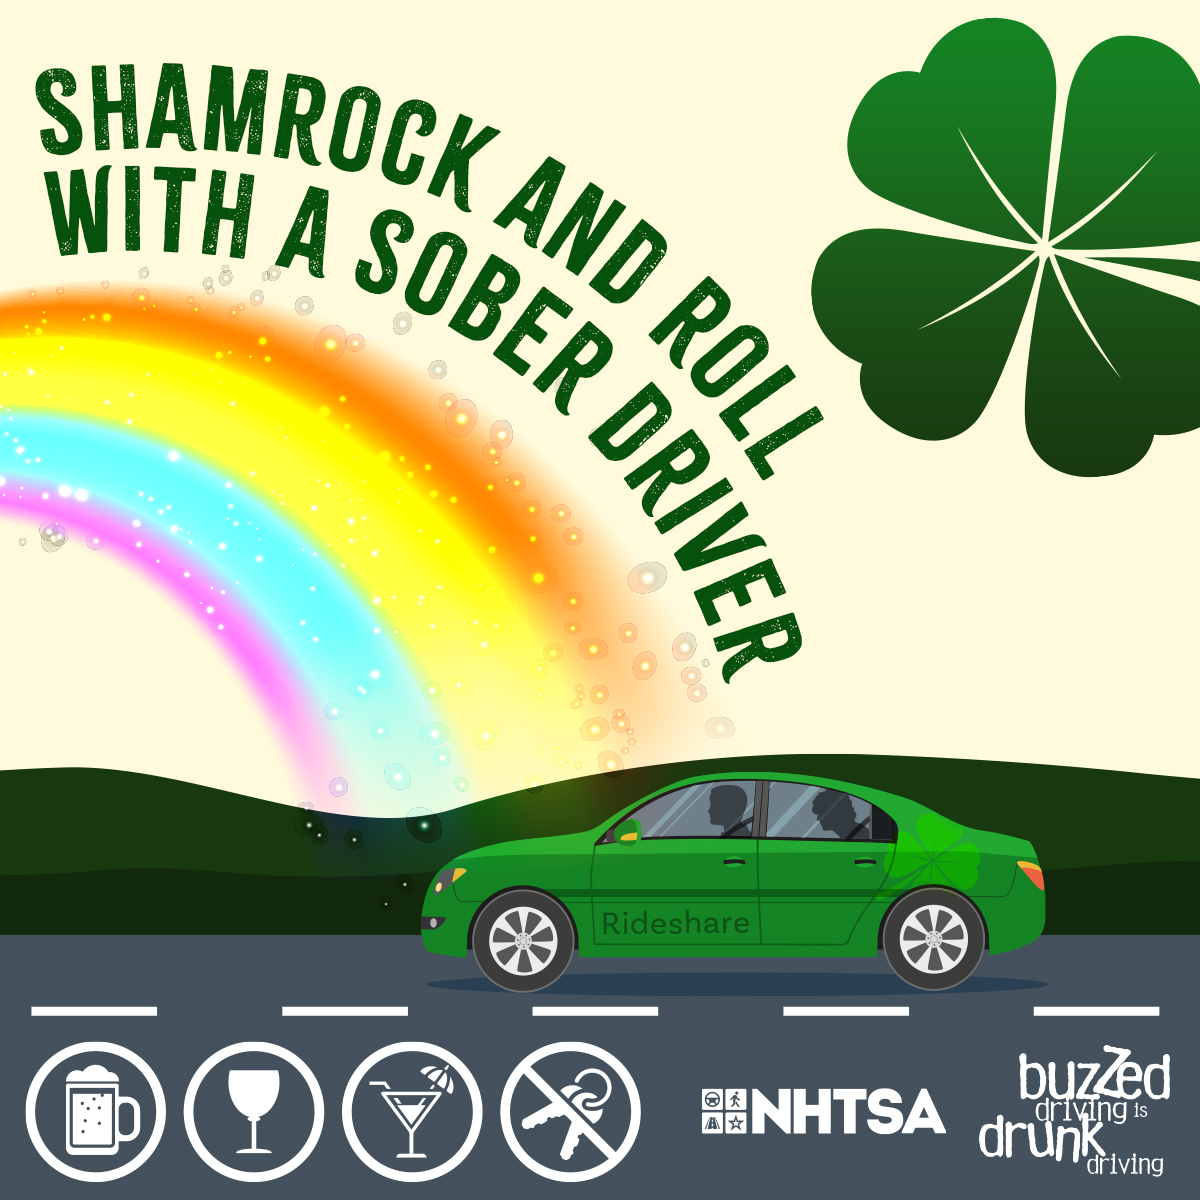 Shamrock and roll with a sober driver. Buzzed driving is drunk driving.